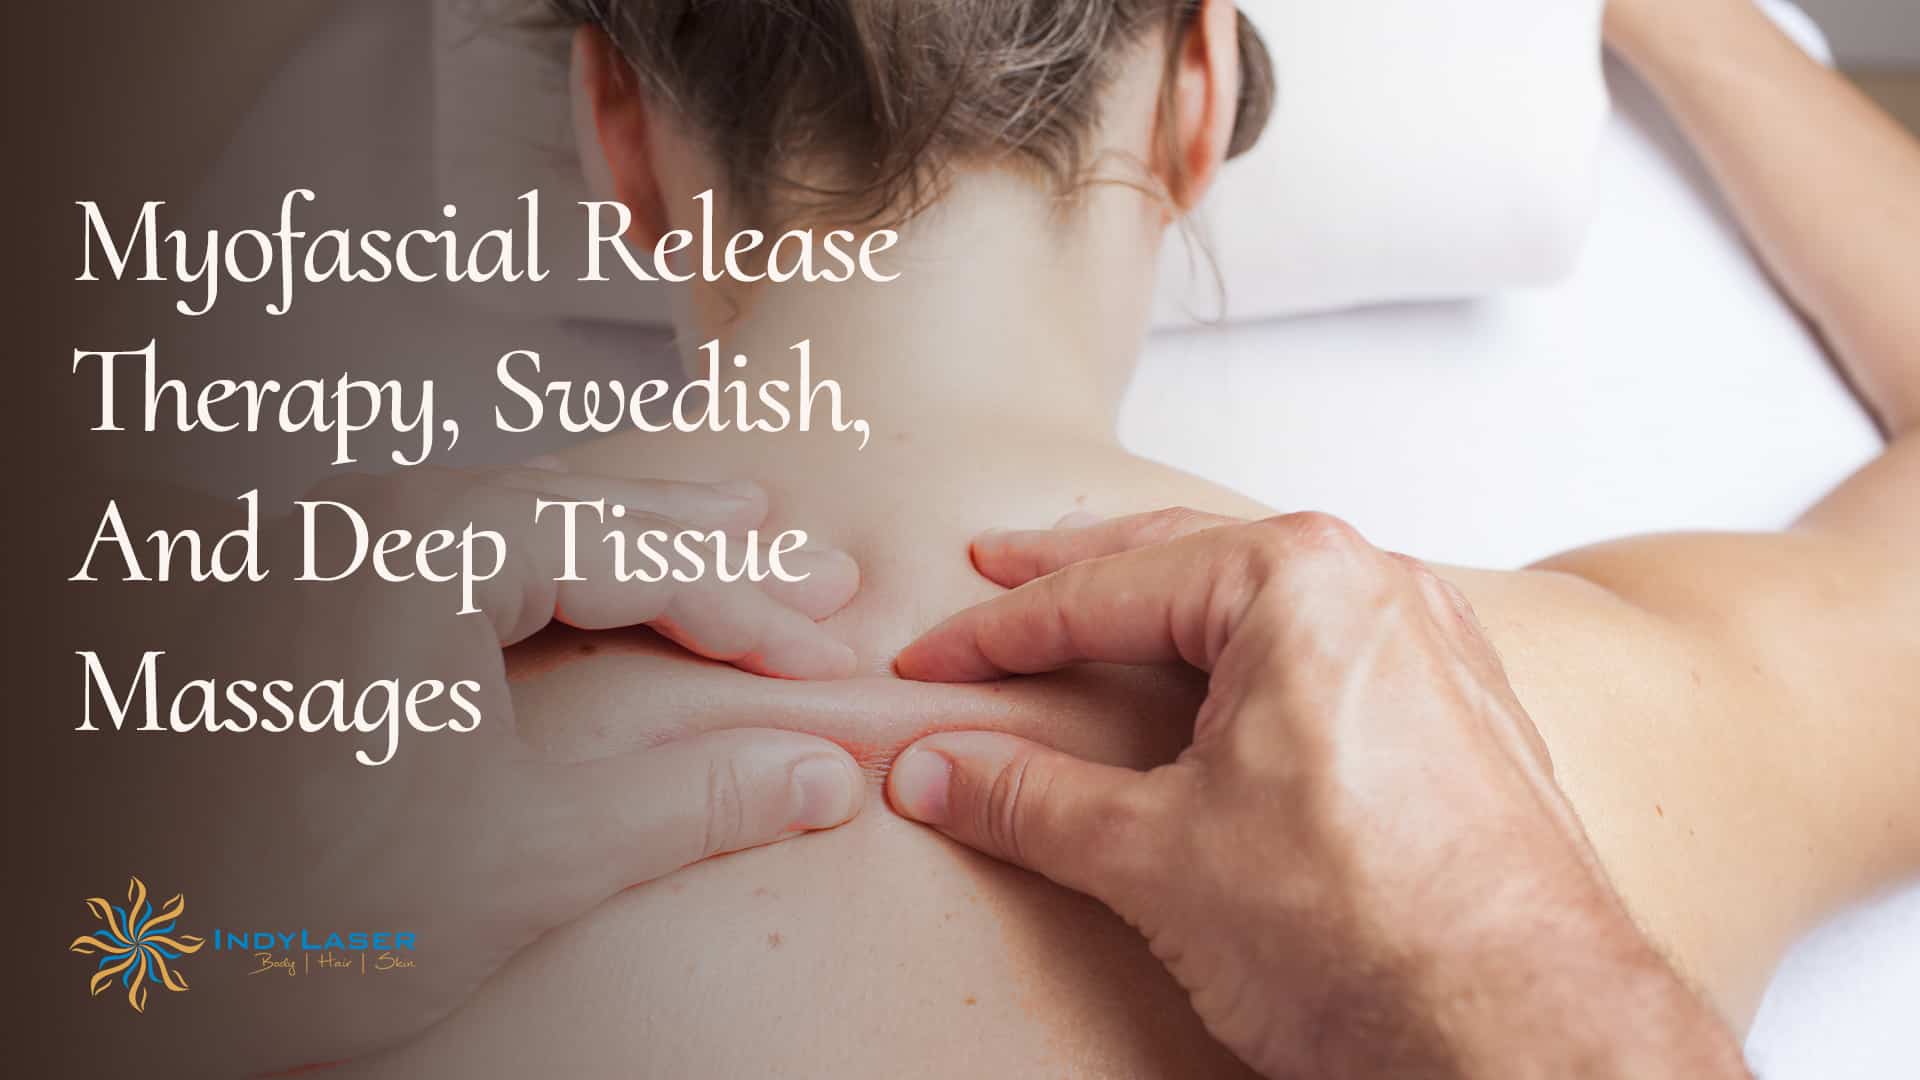 Myofascial Release Swedish, And Deep Tissue Massages